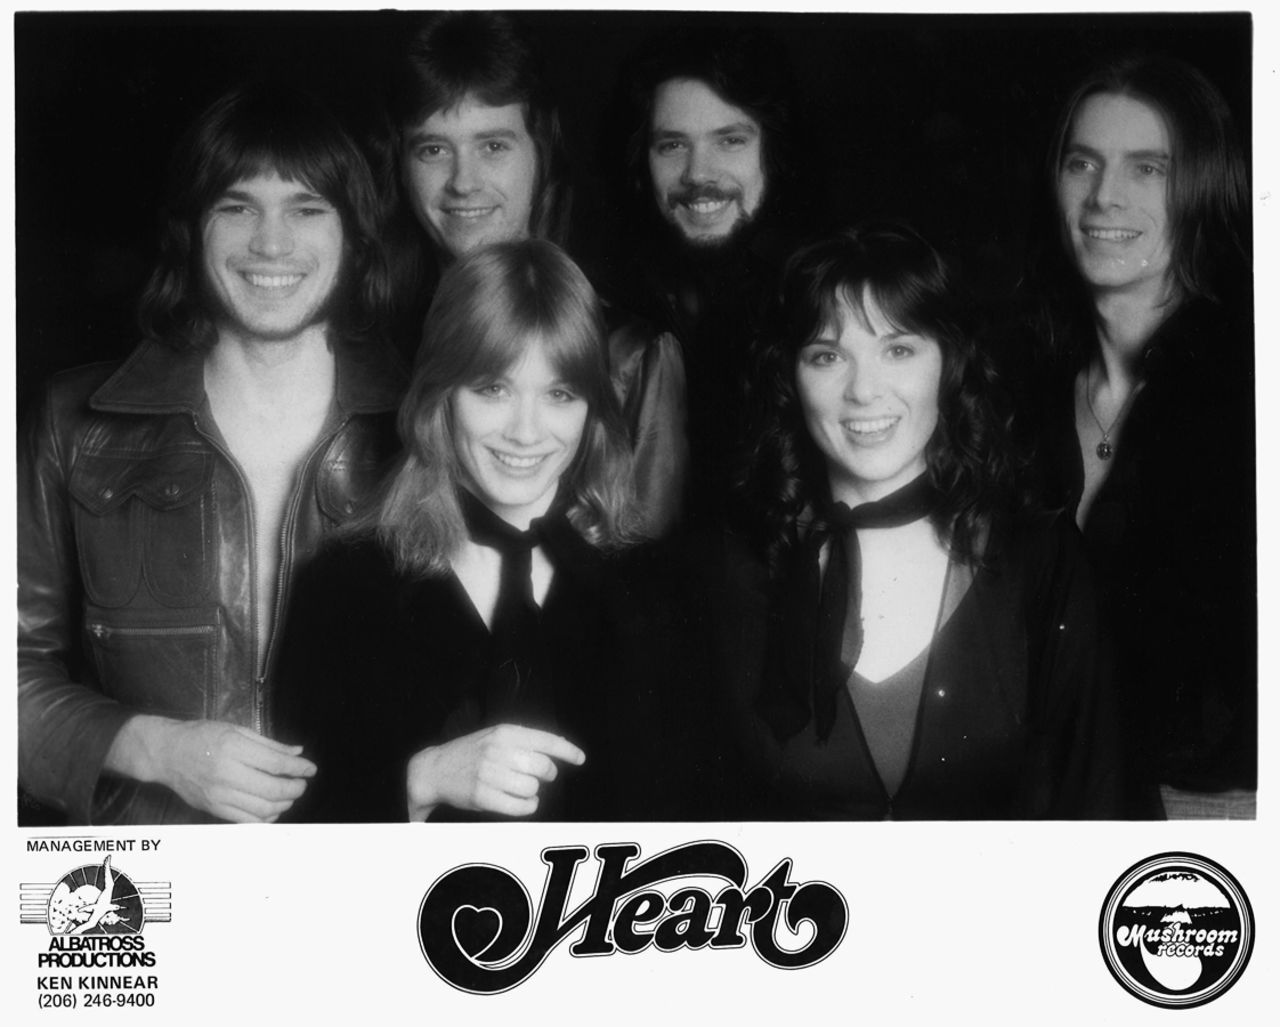 Sisters Ann and Nancy Wilson were two of the first women to find fame fronting a hard rock band. The female rockers dominated the video music scene in the 1980s with hits like "Alone," and "What About Love." Their band included guitarist Roger Fisher, bassist Steve Fossen, guitarist/keyboard player Howard Leese and drummer Michael DeRosier.